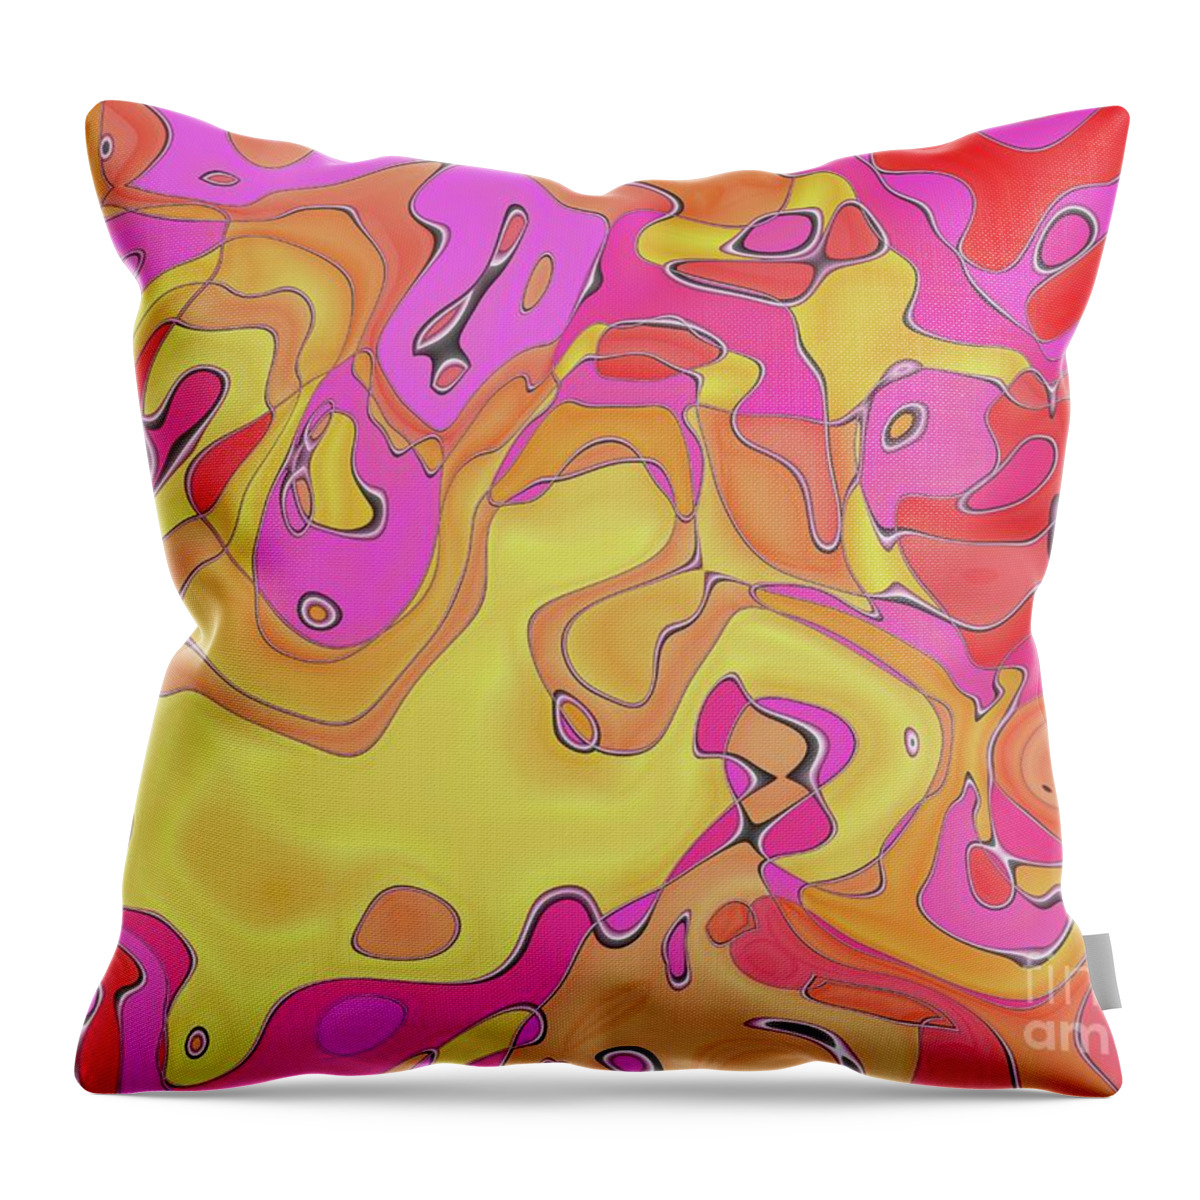 Abstract Throw Pillow featuring the digital art Lignes en Folie - 08a by Variance Collections